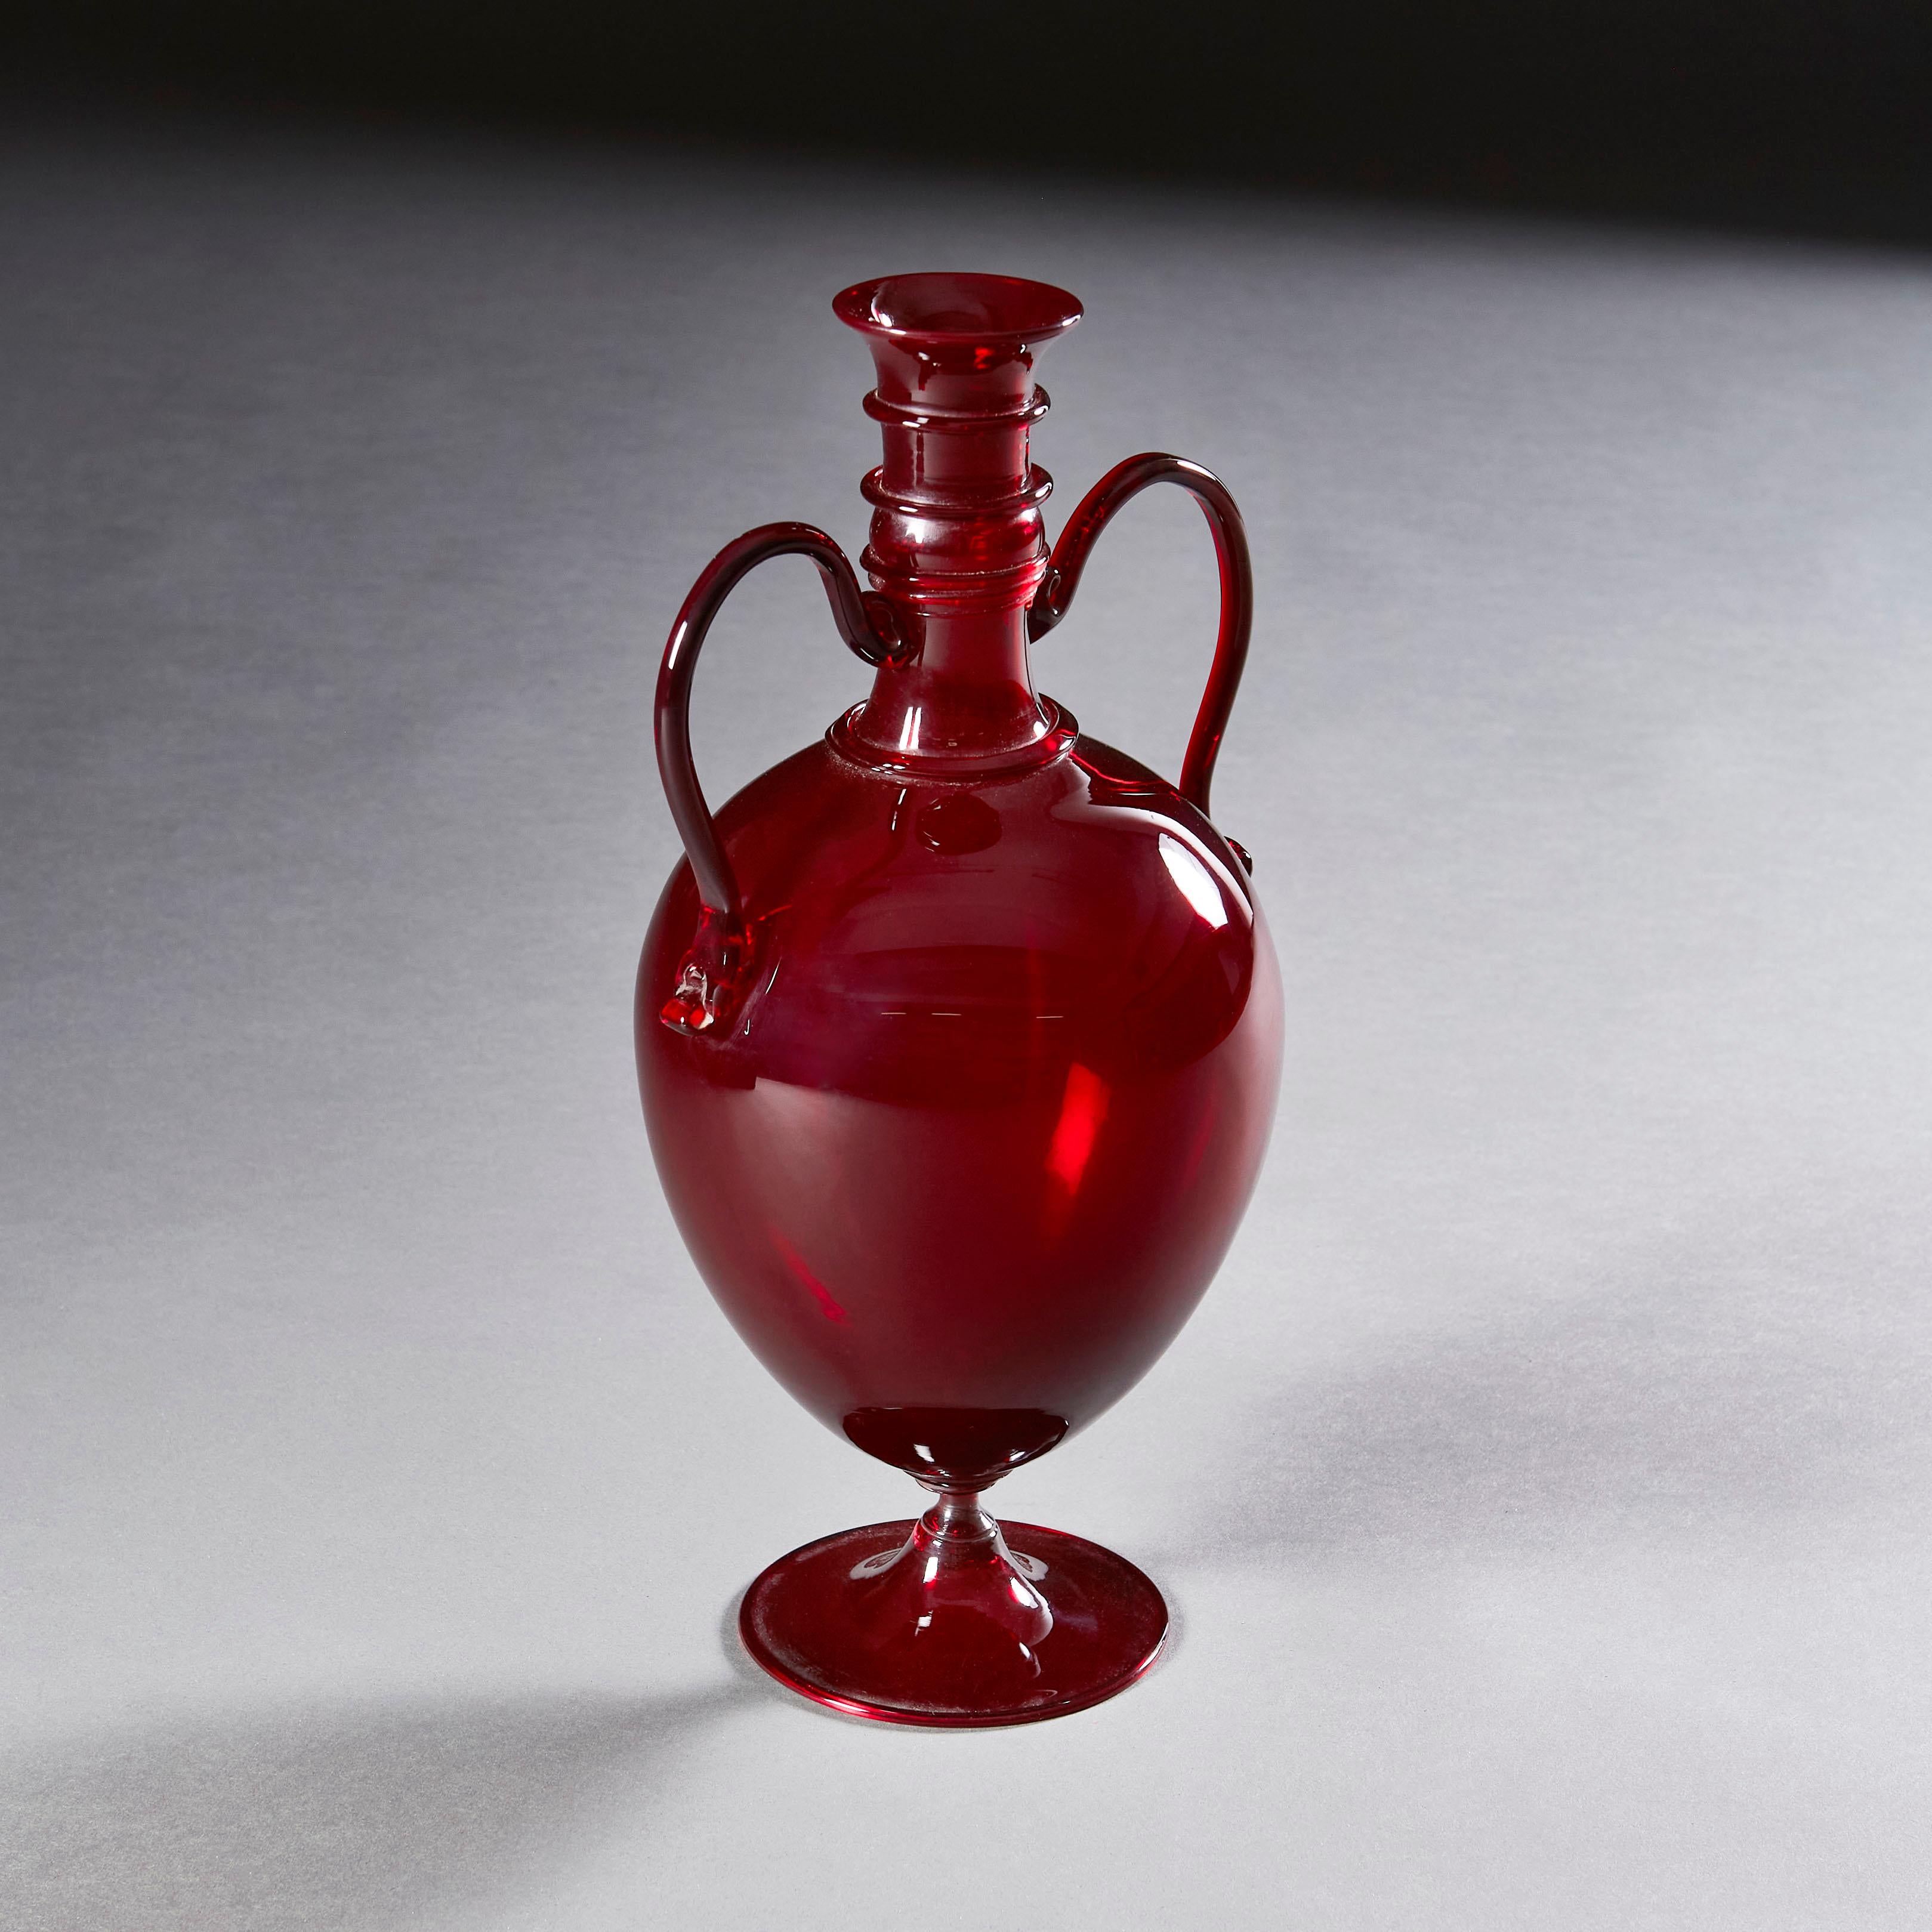 A rare mid nineteenth century red glass vase of amphora form, with handles attaching to the body of the vessel in delicate scrolls, all supported by a very fine tip, that seems to give the illusion of the body of the vessel floating above the base.